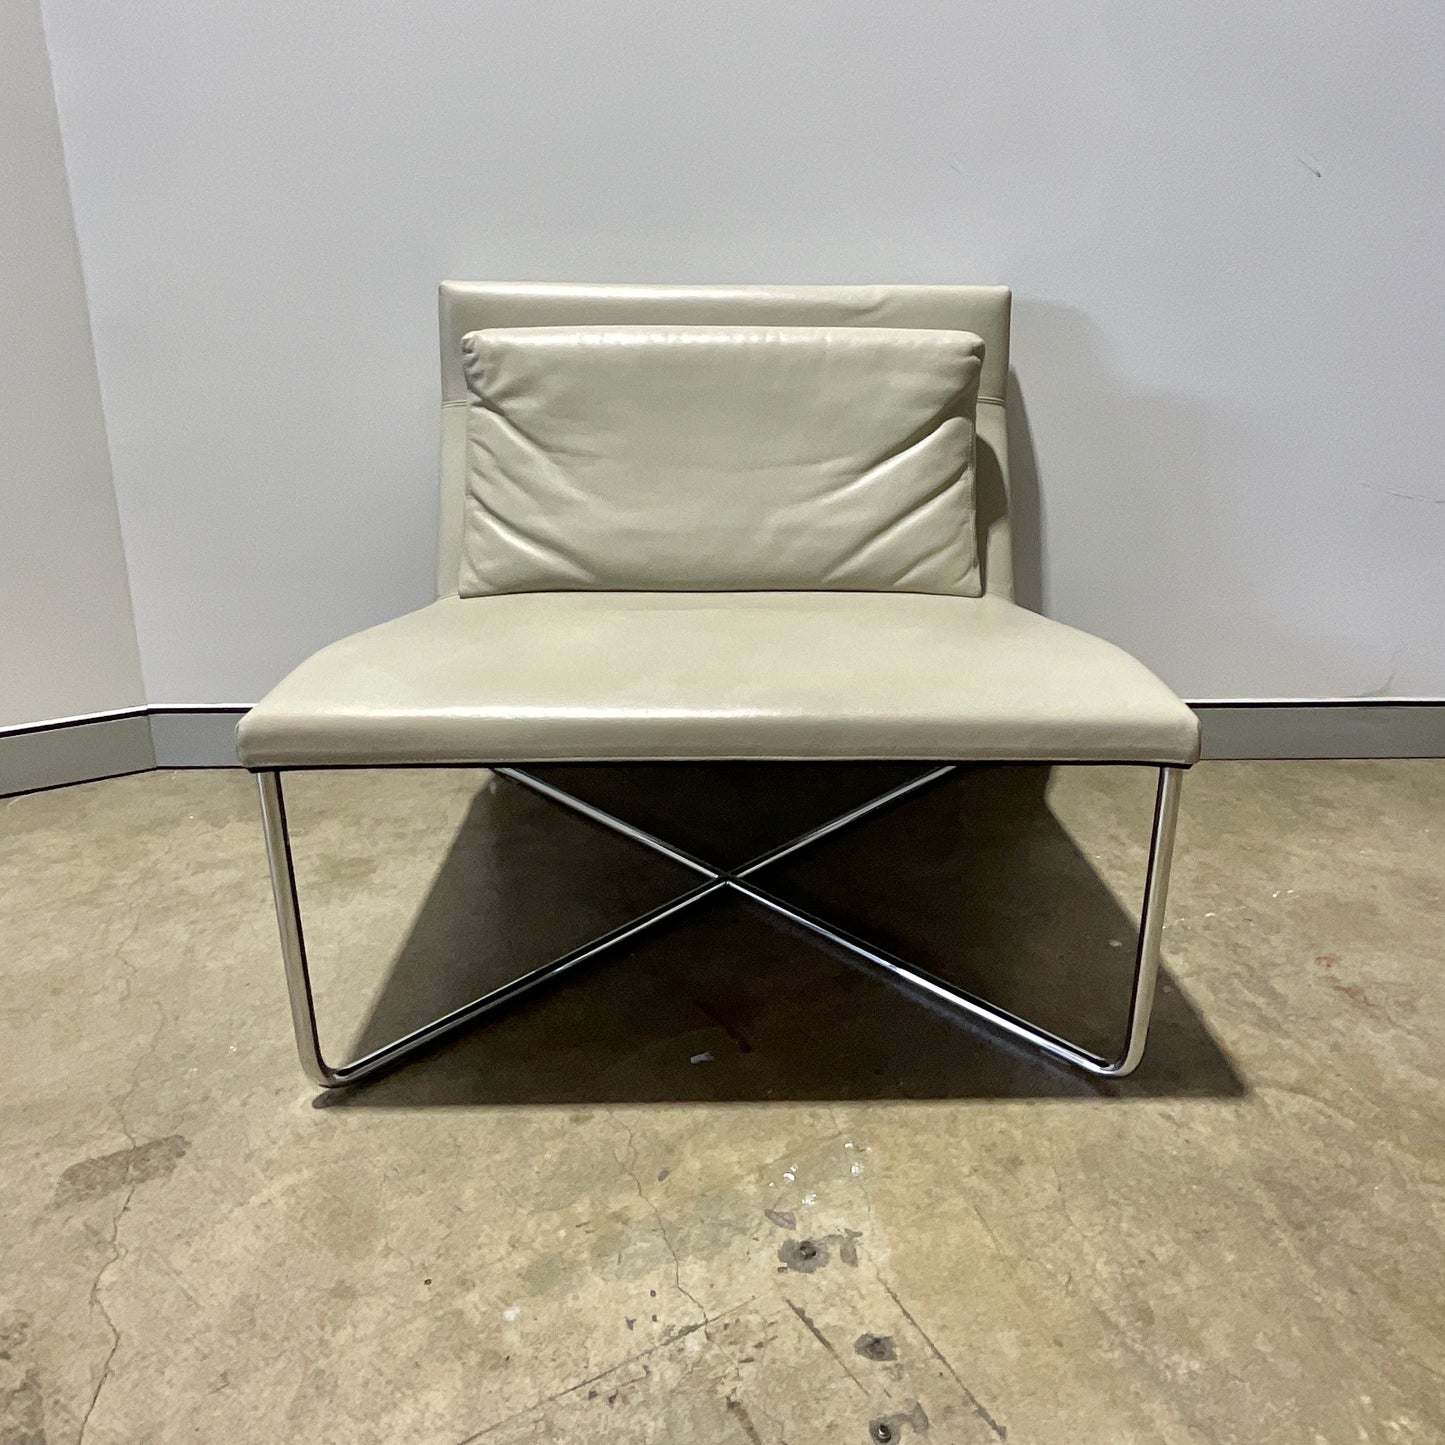 Held Chair by Rodolfo Dordoni for Minotti (2 available)